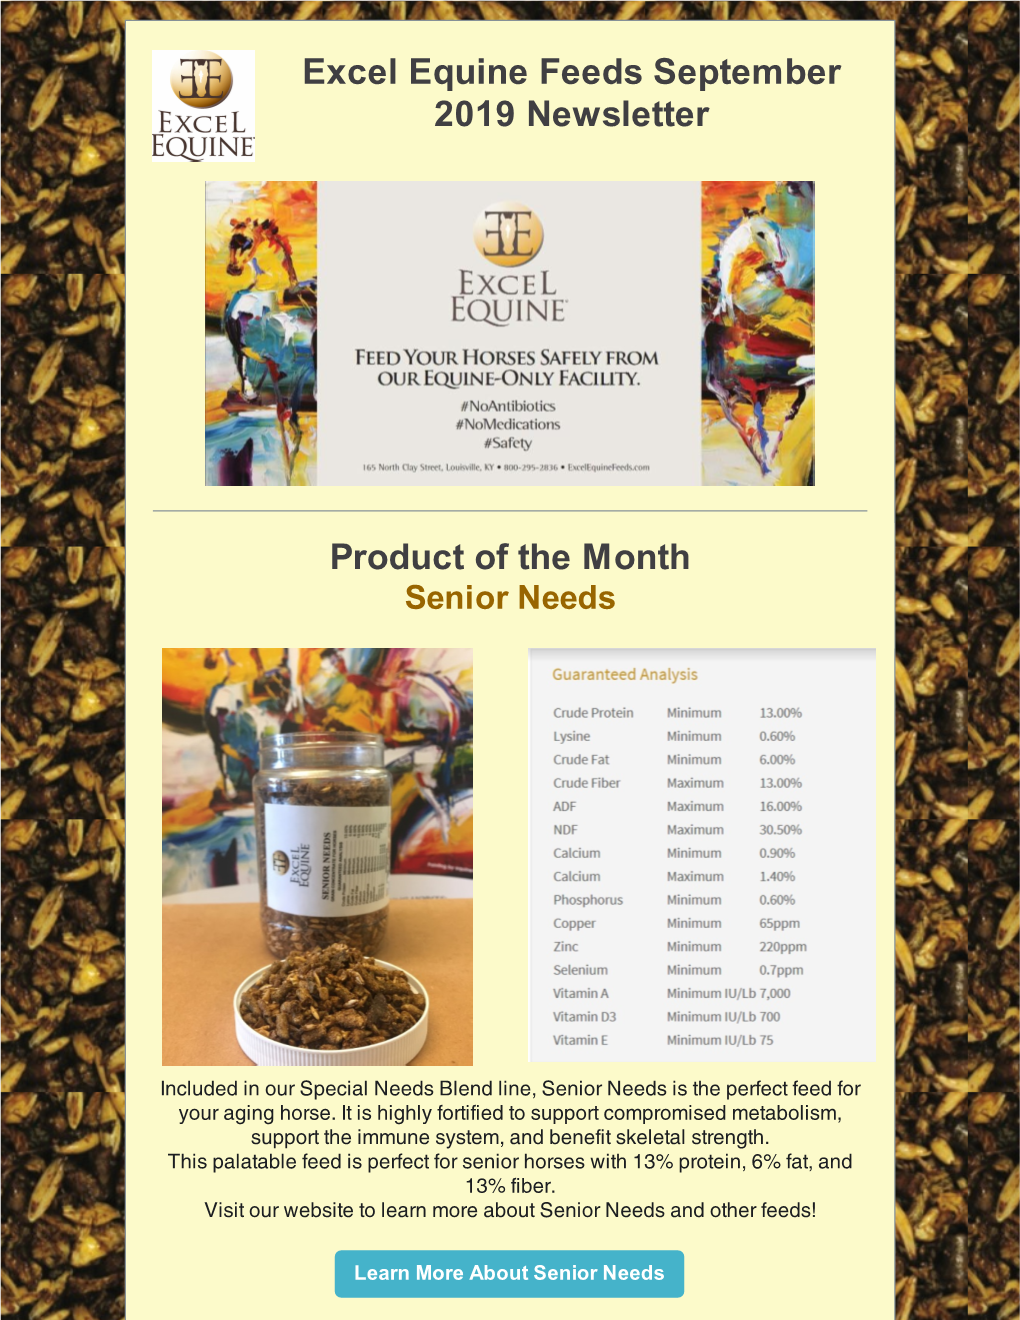 Excel Equine Feeds September 2019 Newsletter Product of the Month